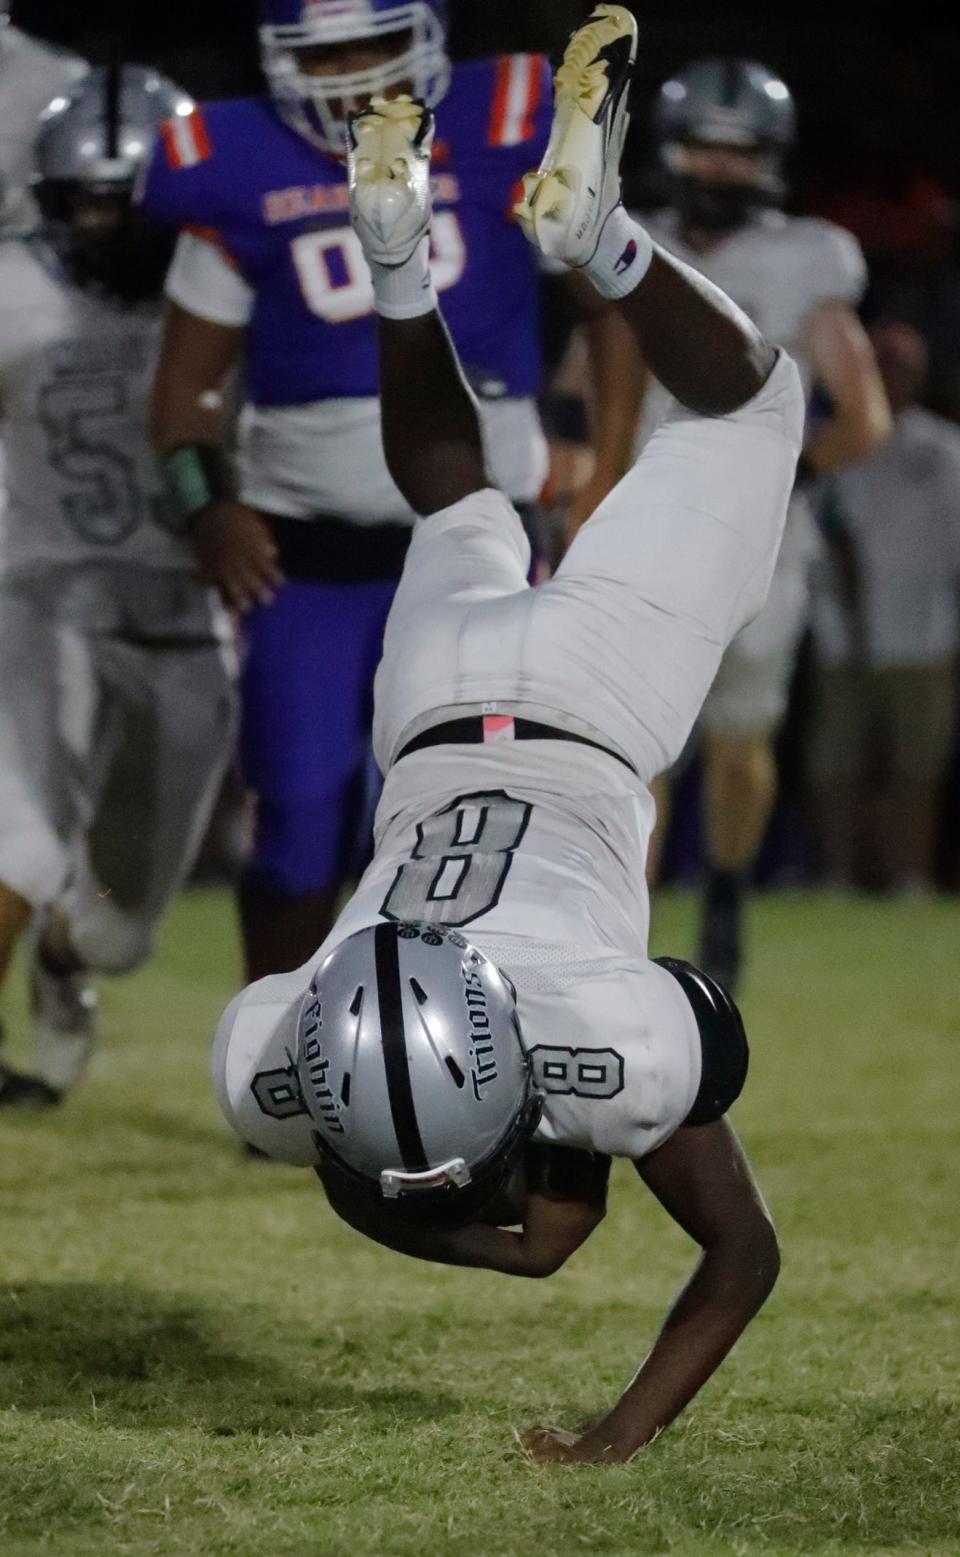 Running back Jamauris Woolfork gets flipped after being tackled during a run. The Mariner Tritons visited the Cape Coral High School Seahawks Thursday, October 27, 2022 in a rivalry matchup.